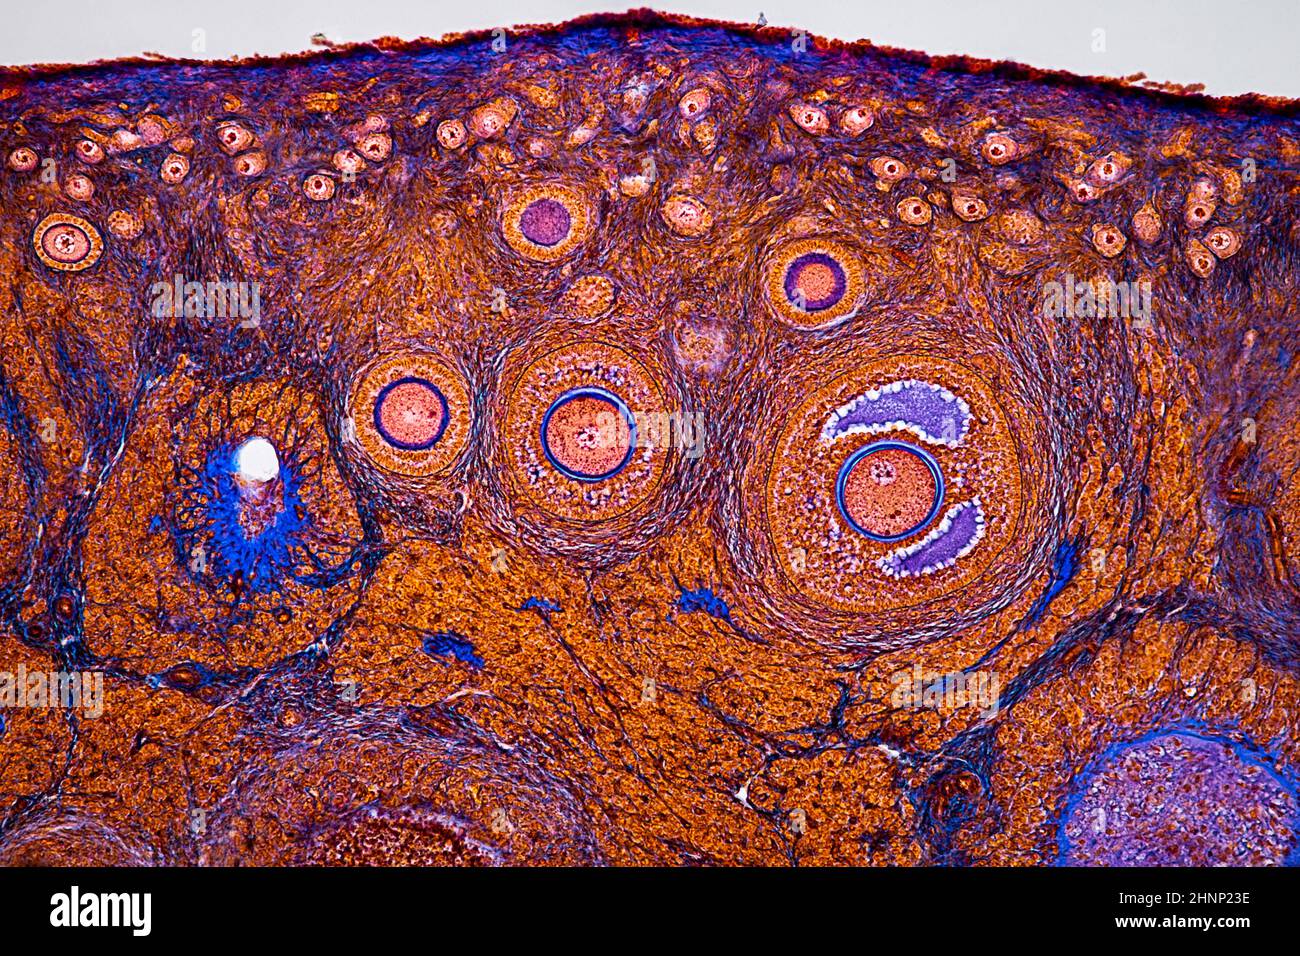 histological image of an ovary showing primary, secondary and terciary follicles (100x magnification) Stock Photo